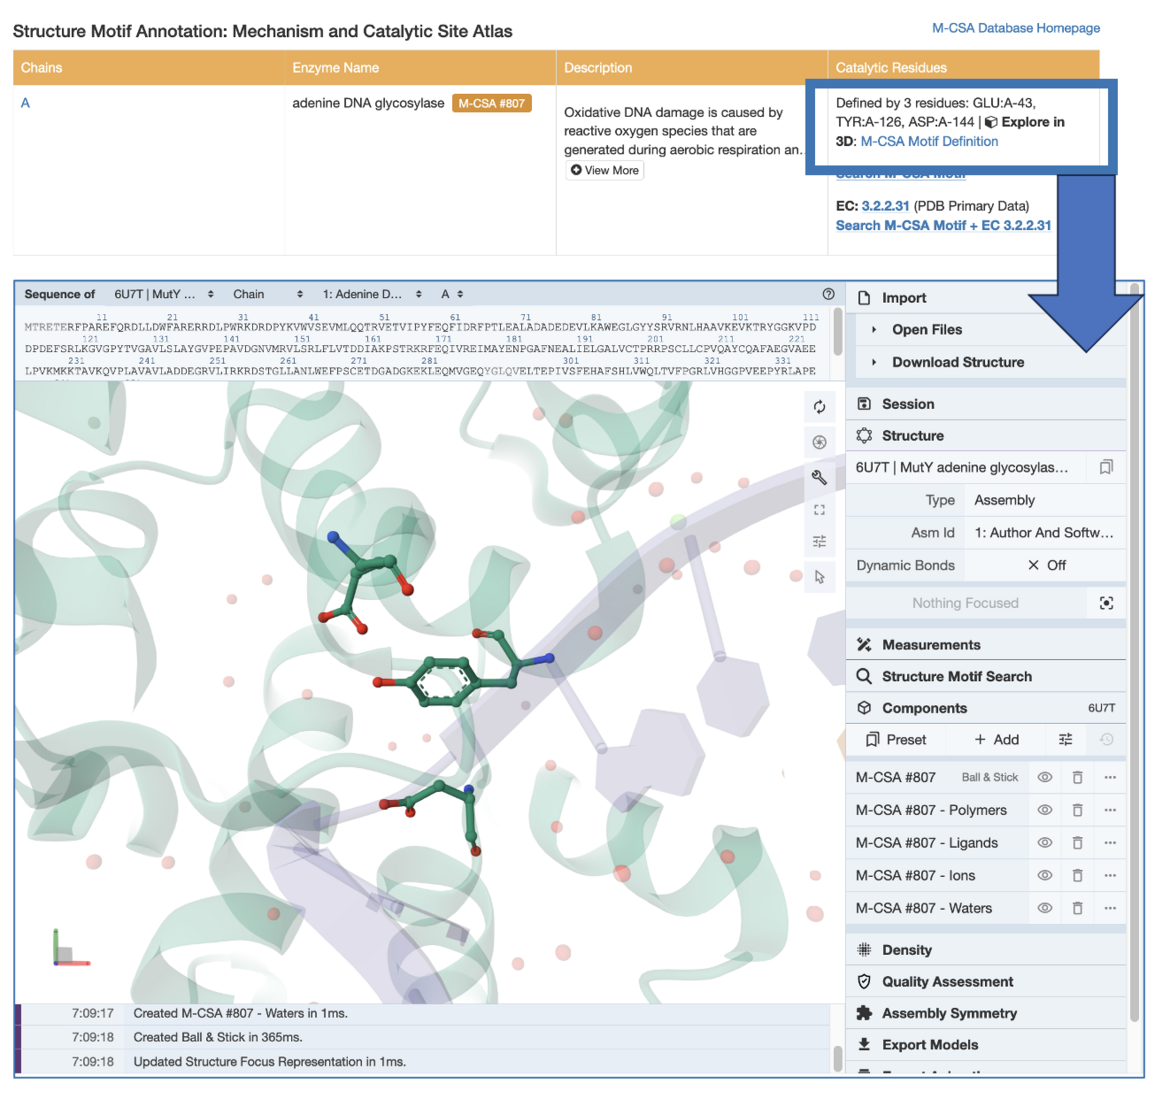 <I>From the Annotations tab, select the Explore in 3D option to view in Mol*</I>